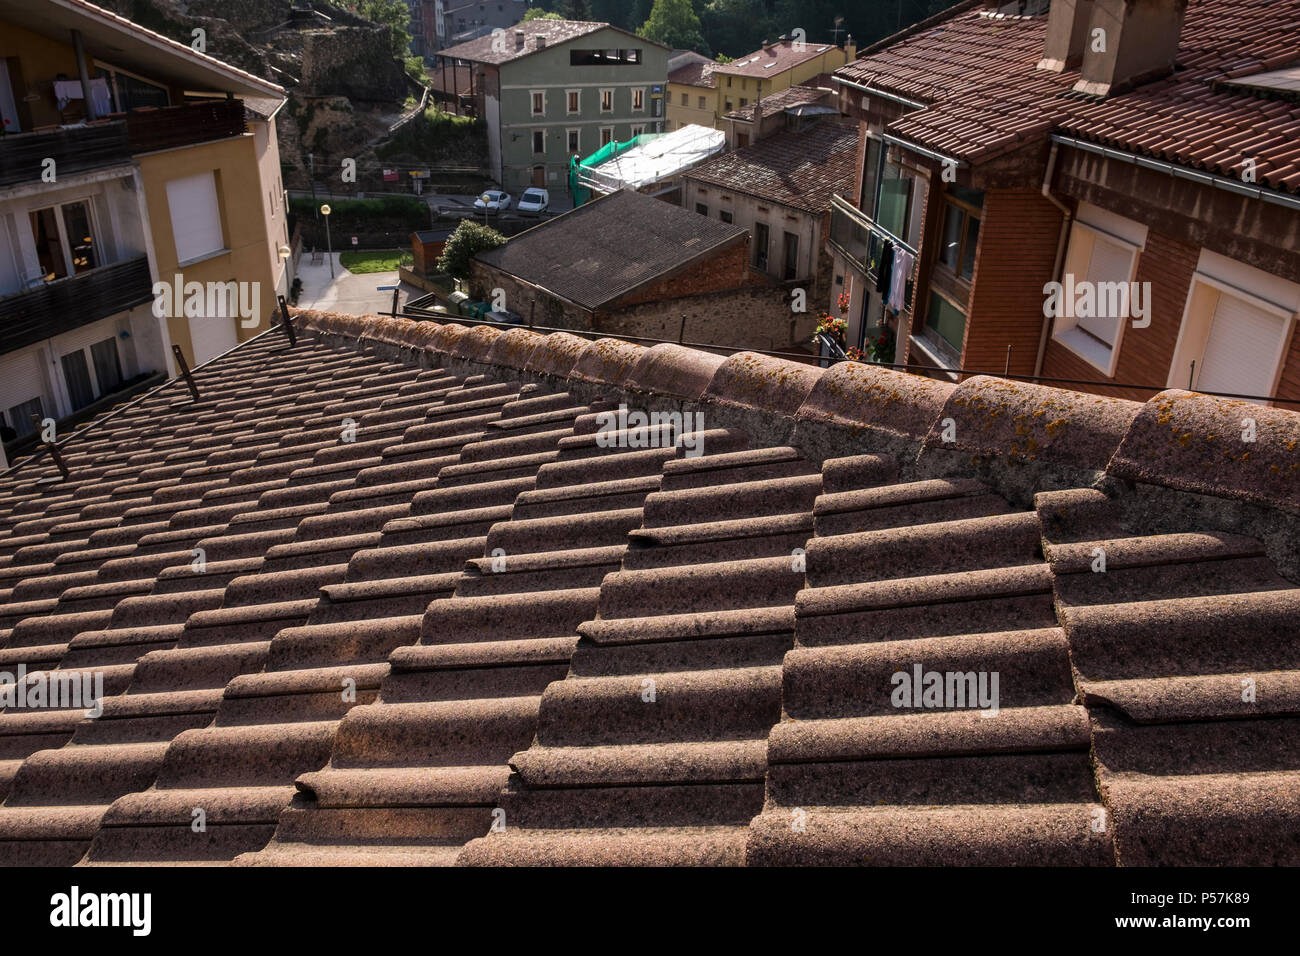 Views over the tiled rooftops of Ribes de Freser in the Nuria valley, Catalonia, Spain Stock Photo